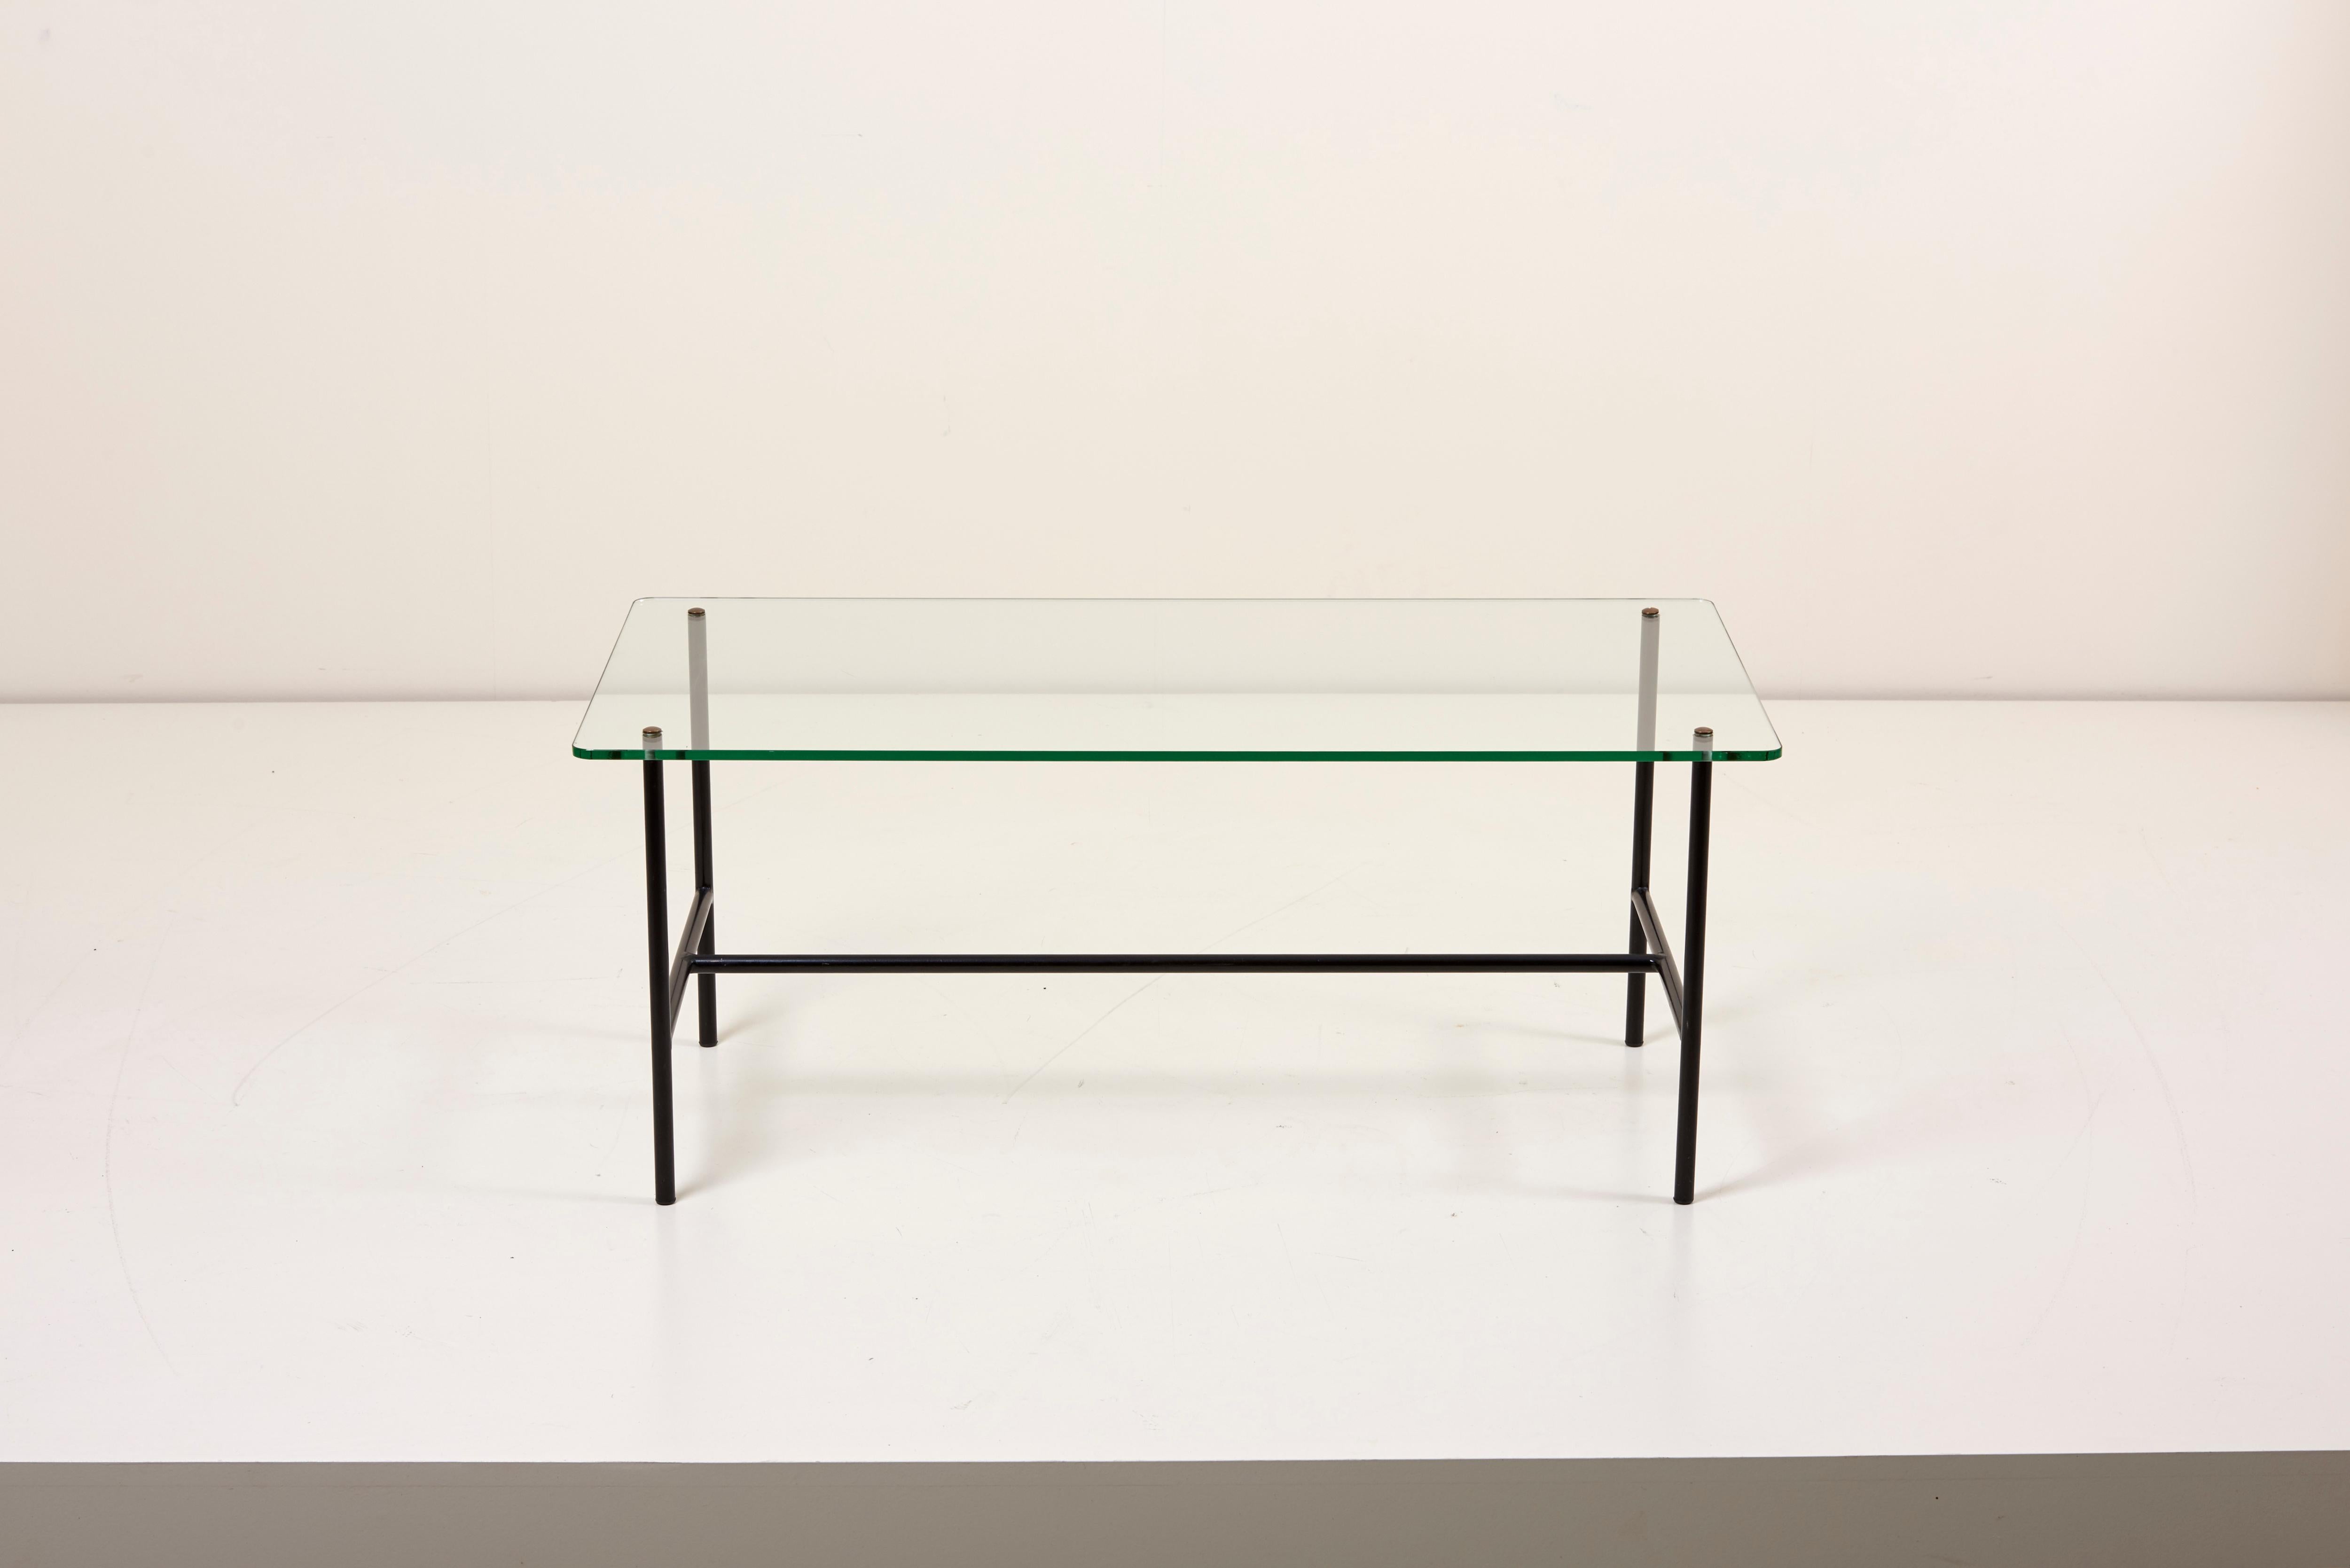 Elegant French coffee table with glass top and iron frame designed by Pierre Guariche for Disderot.
The glass top is pierced and held in place by 4 brass / bronze flat round finials; the top is then cantilevered over the enameled steel frame. Glass